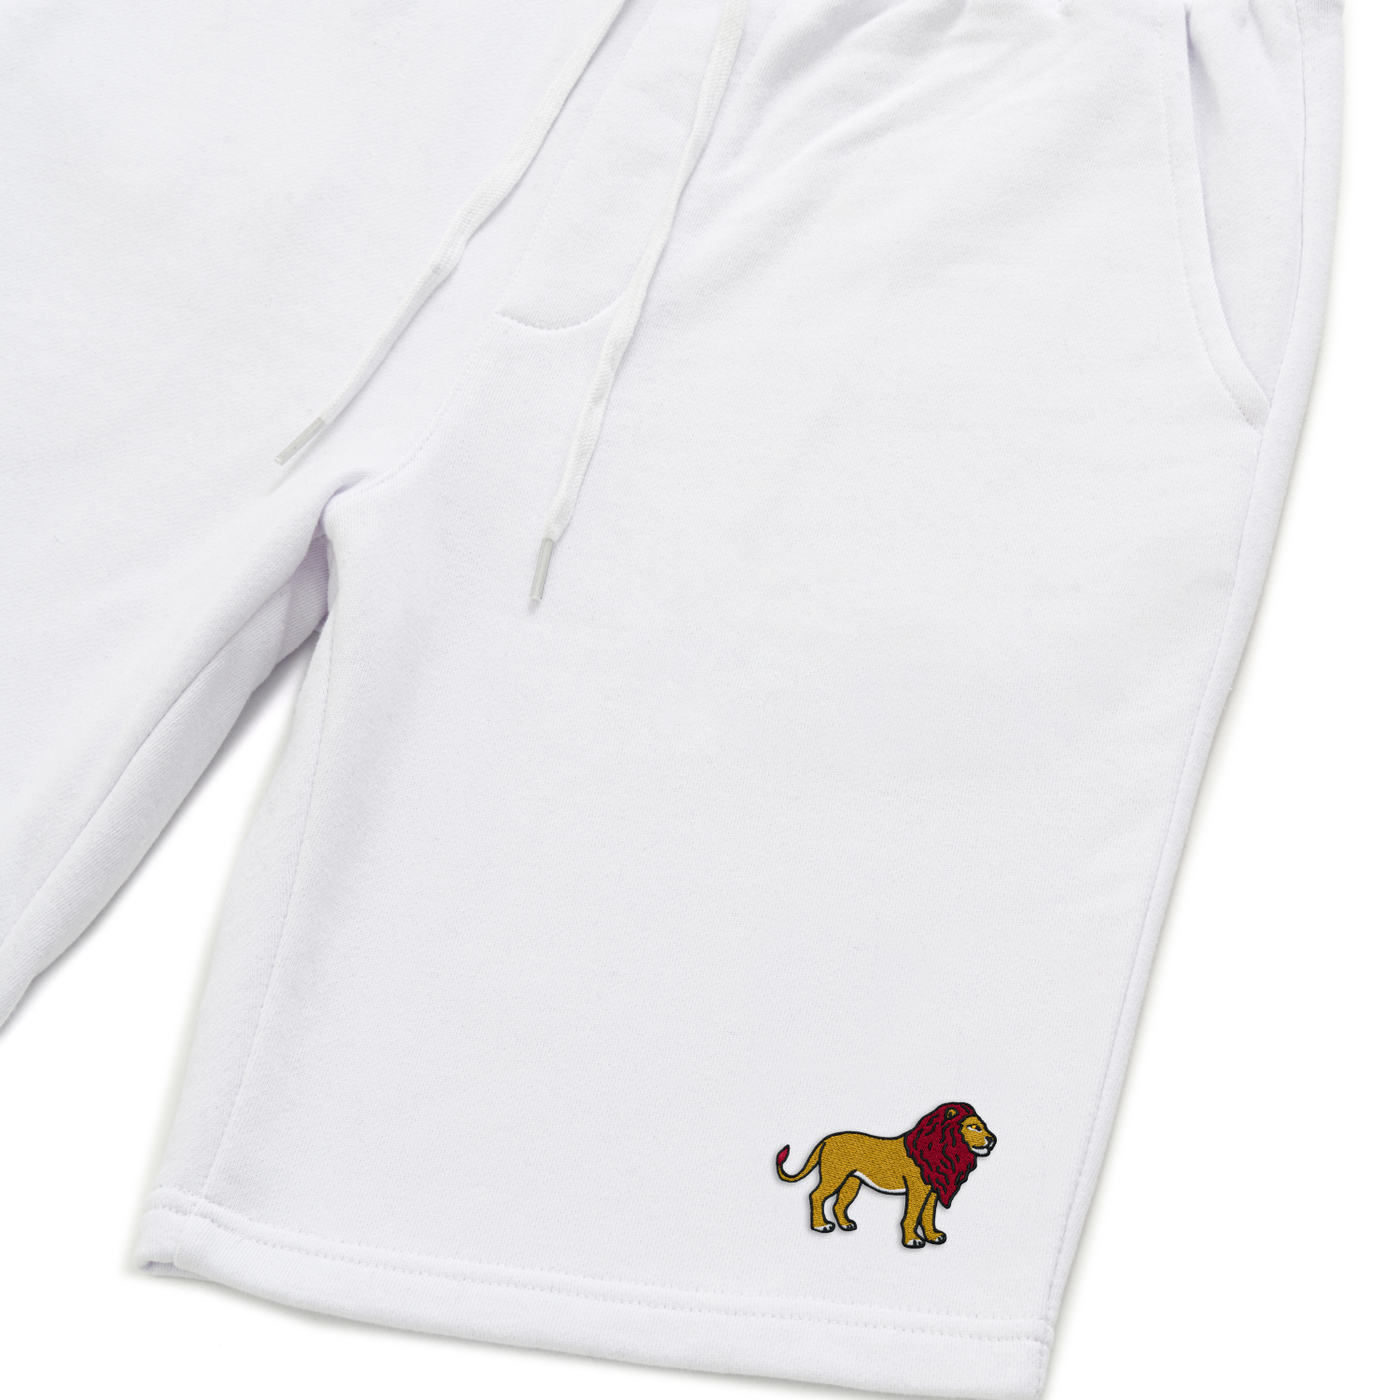 Bobby's Planet Men's Embroidered Lion Shorts from African Animals Collection in White Color#color_white